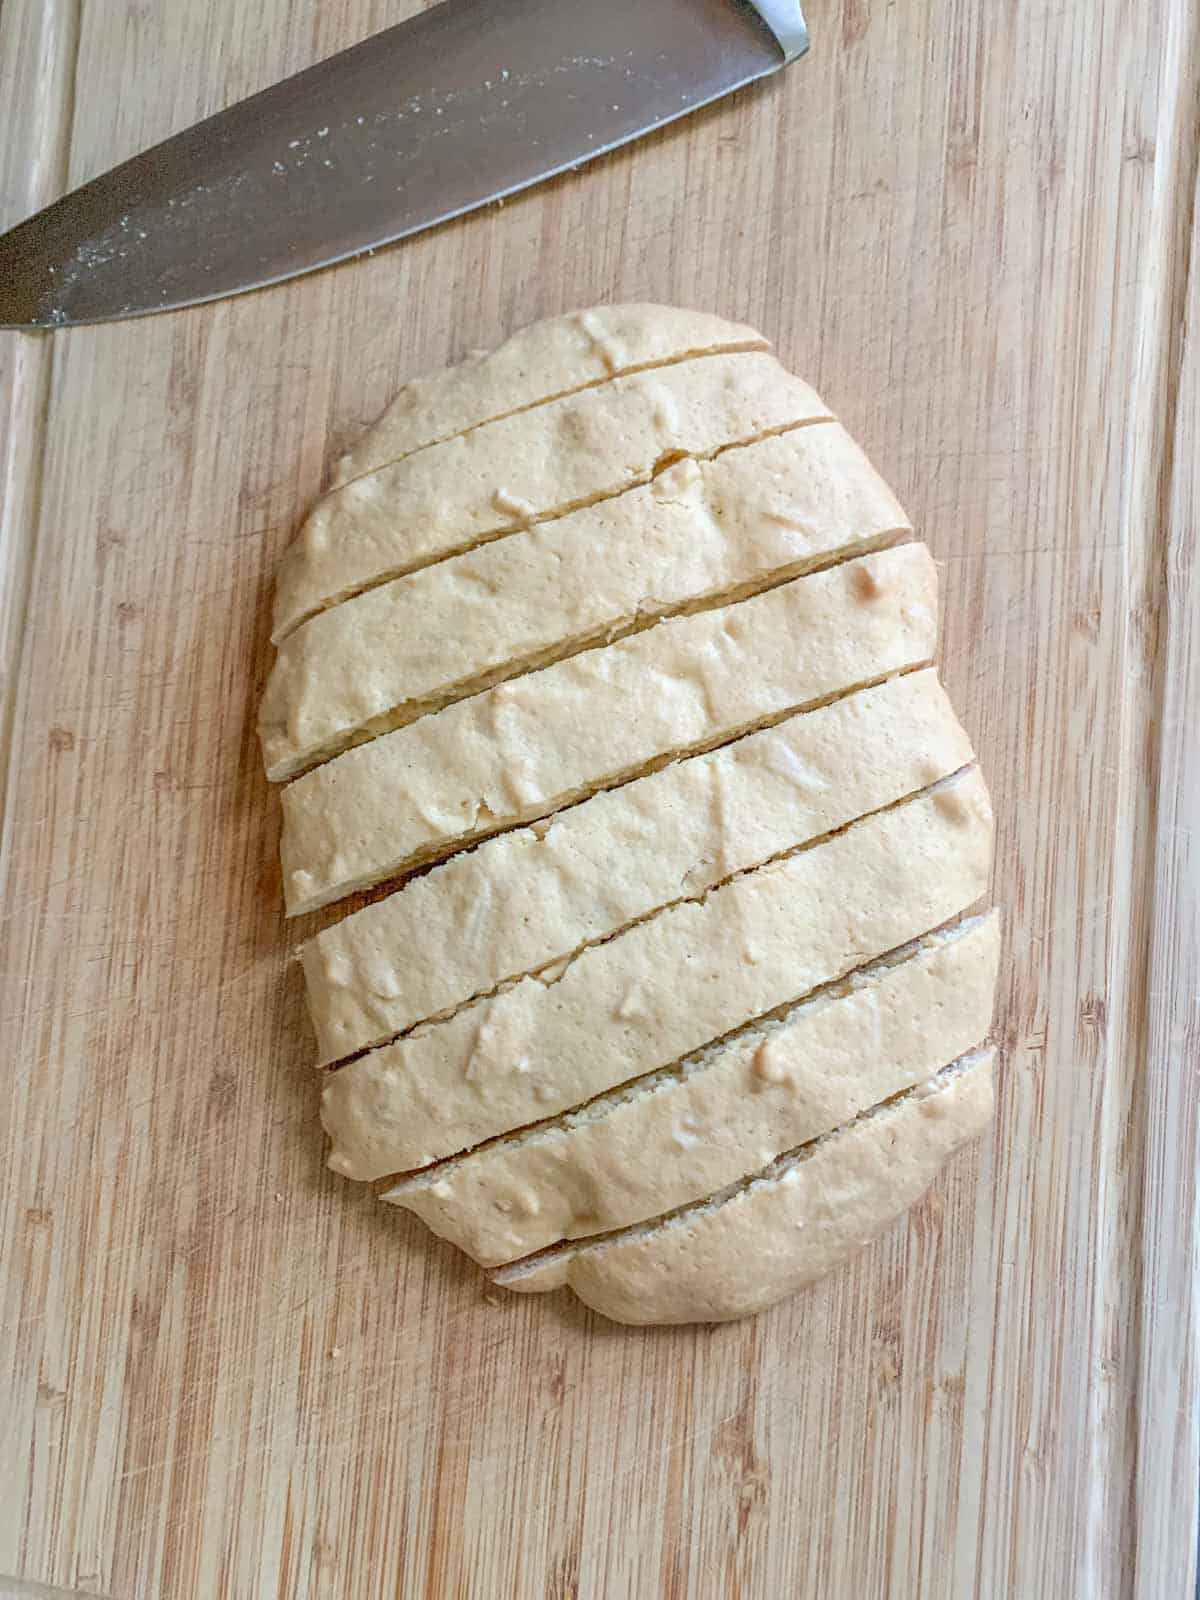 baked biscotti dough sliced